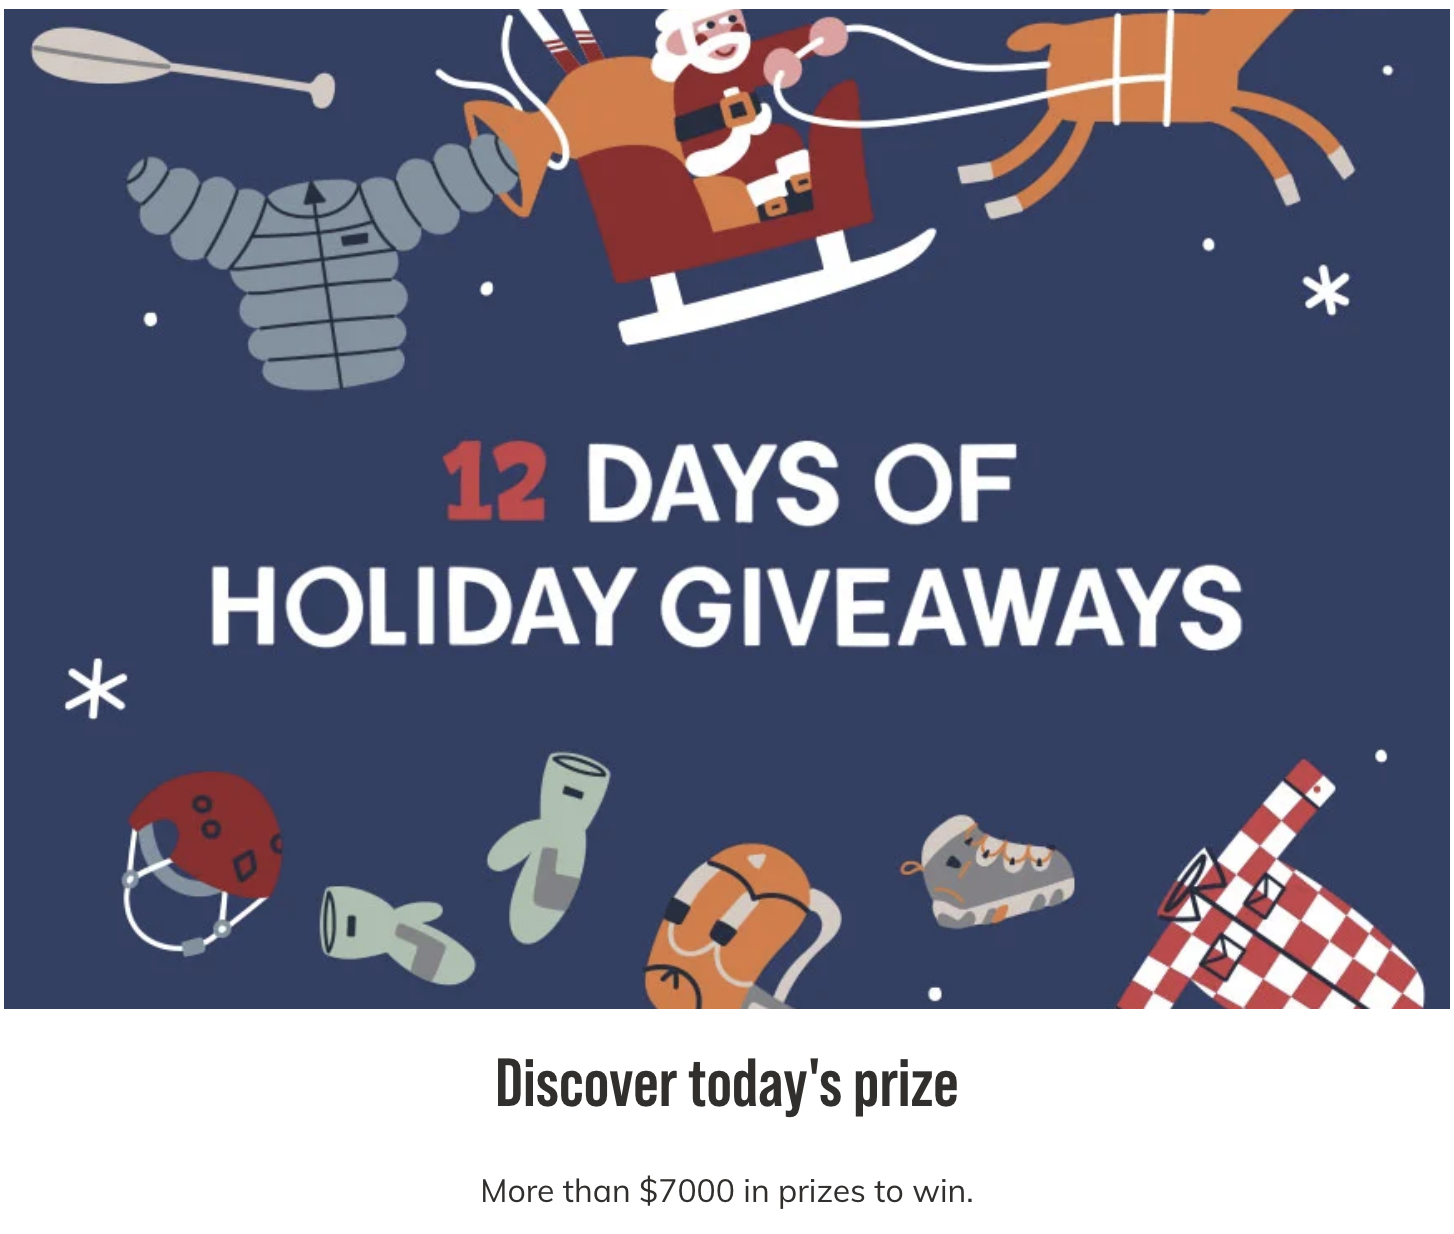 SAIL 12 Days of Holiday Giveaways! Free Stuff in Canada